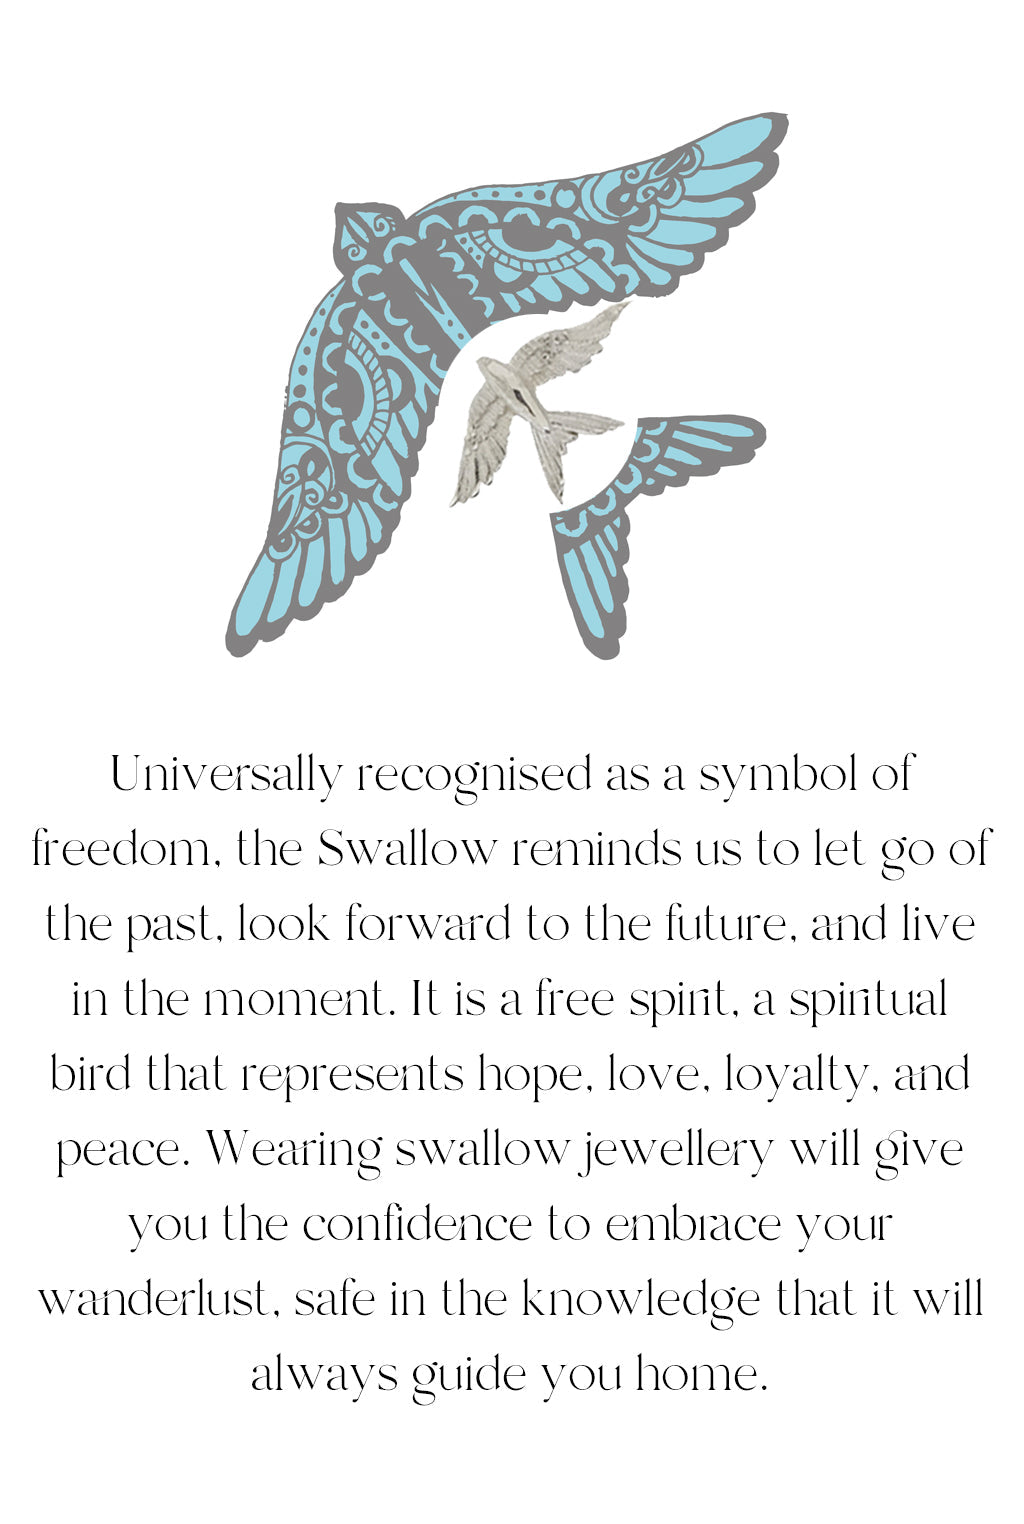 SWALLOW SYMBOLIC MEANING